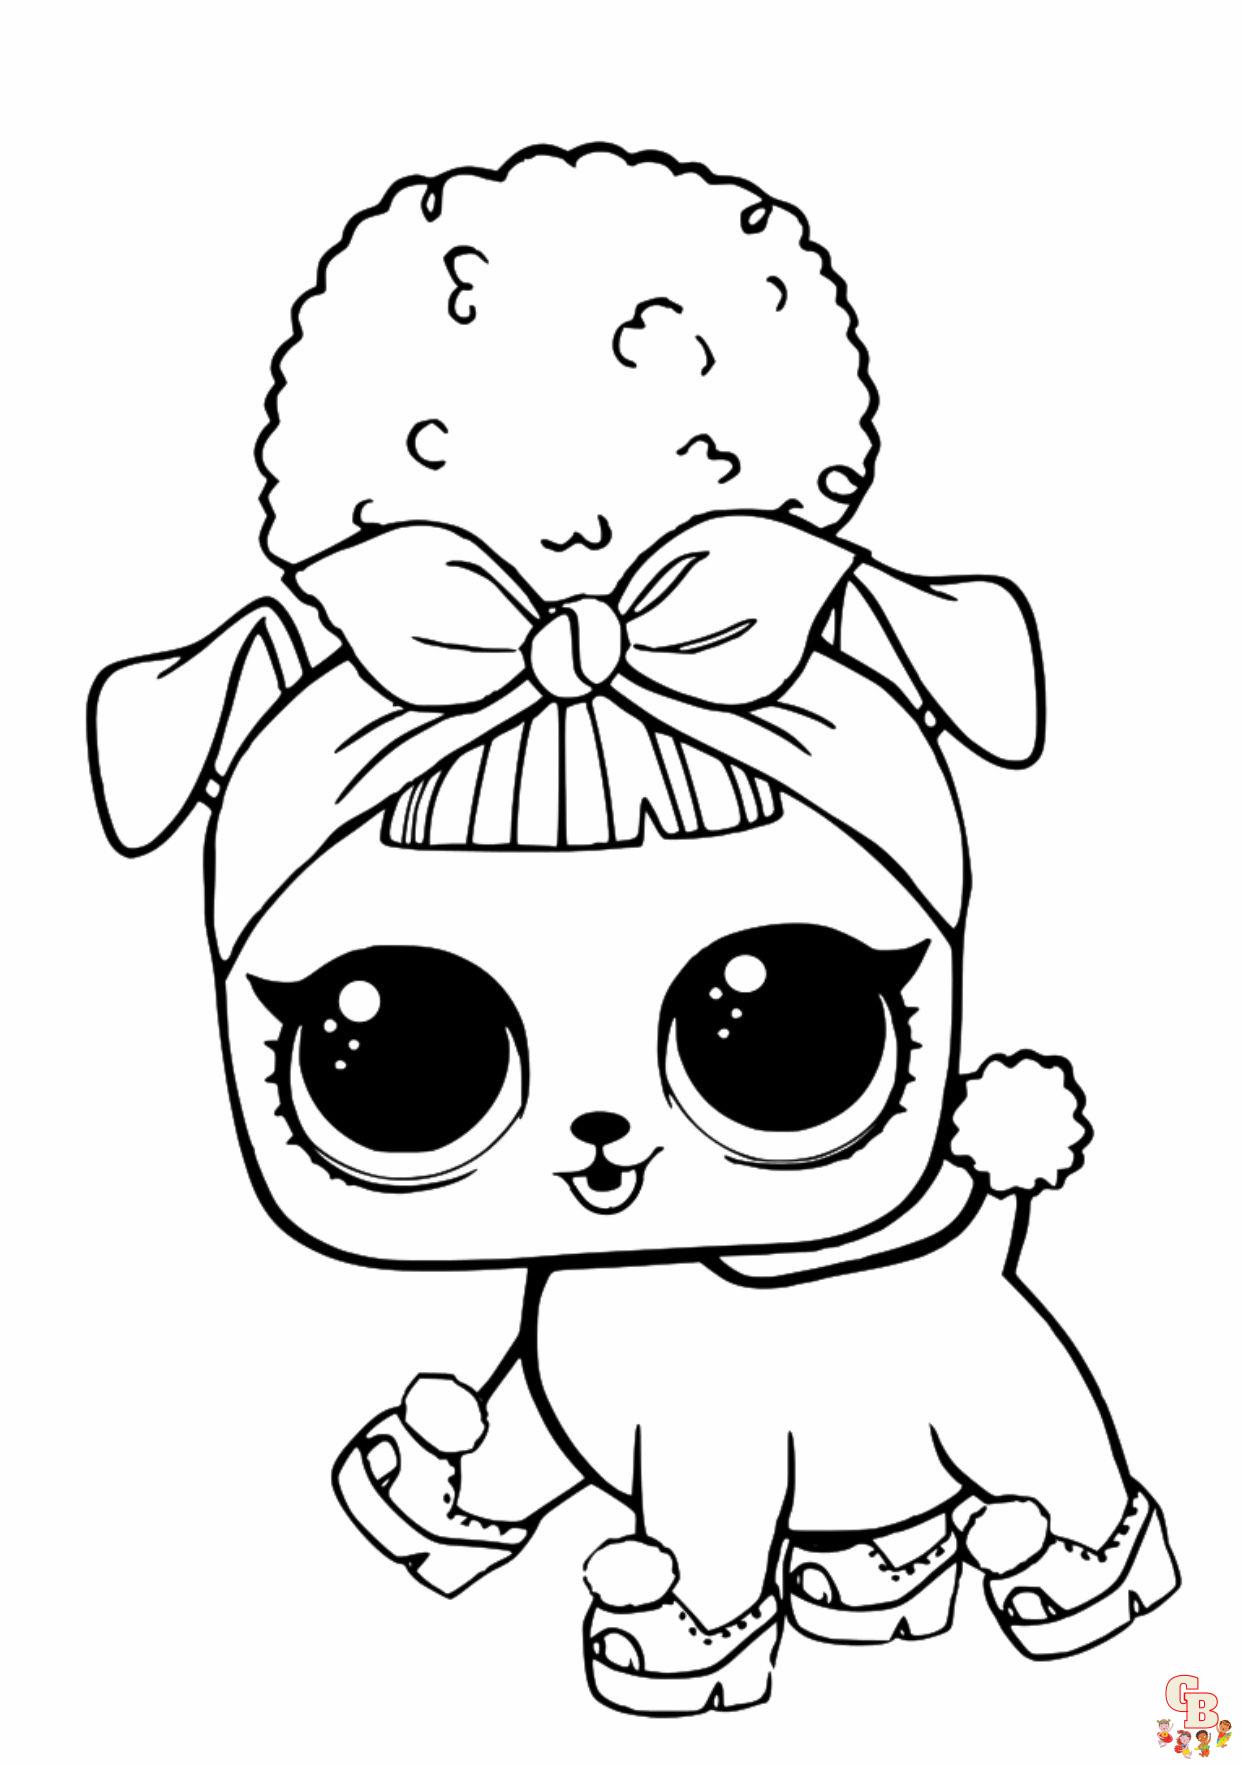 Lol Pet Colouring Pages - Free Colouring Pages